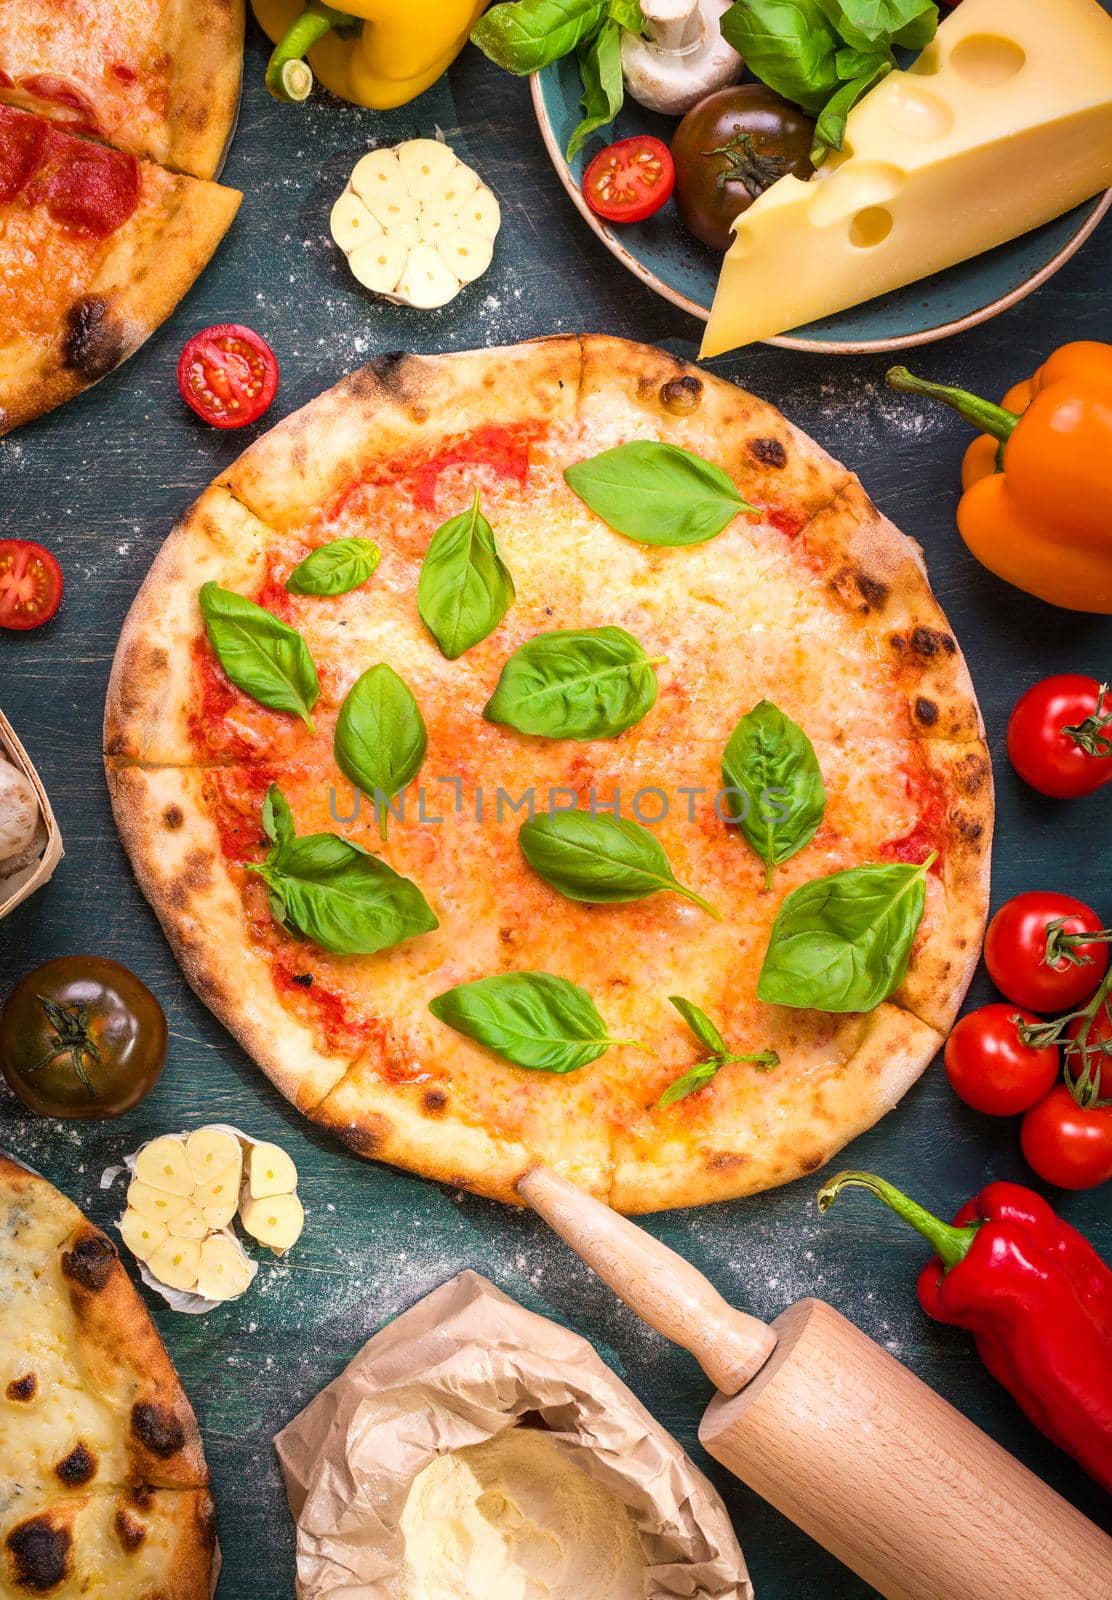 Delicious baked pizza and ingredients for making pizza. Flour, cheese, tomatoes, basil, pepperoni, mushrooms and rolling pin over wooden background. Top view. Pizza ready to eat